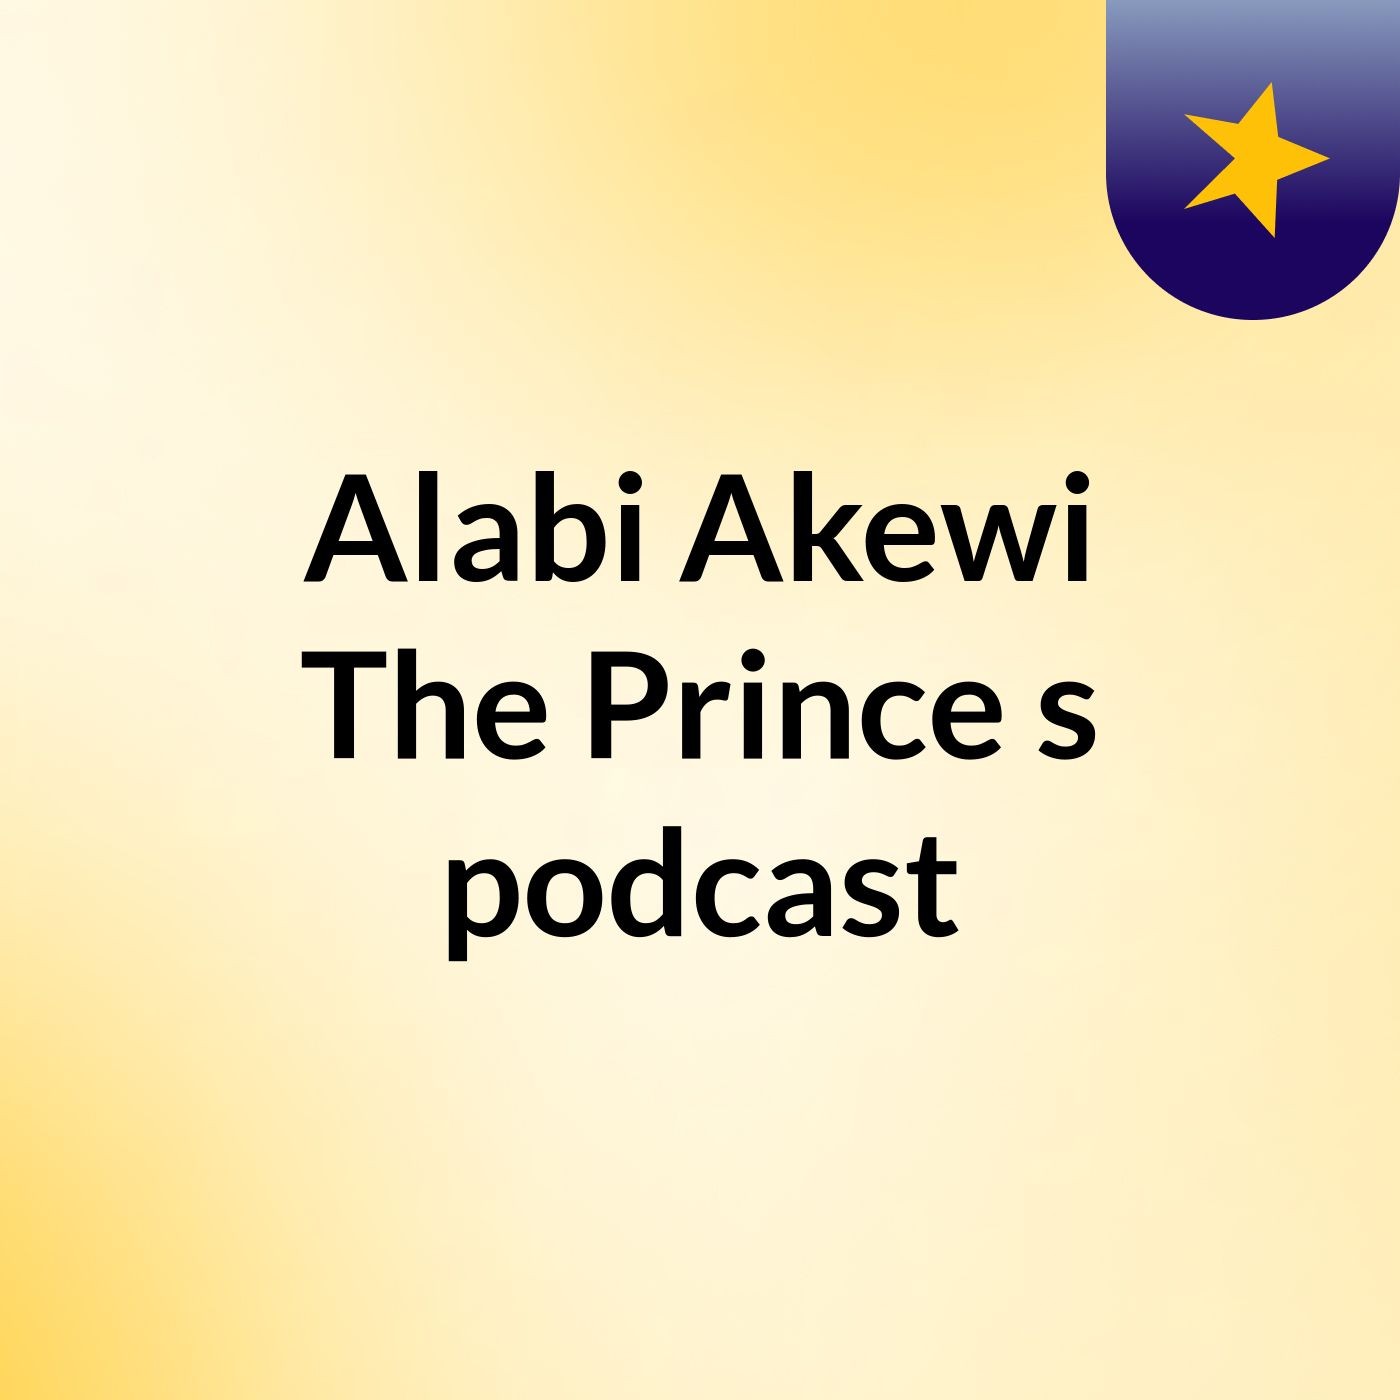 Episode 4 - Alabi Akewi The Prince's podcast